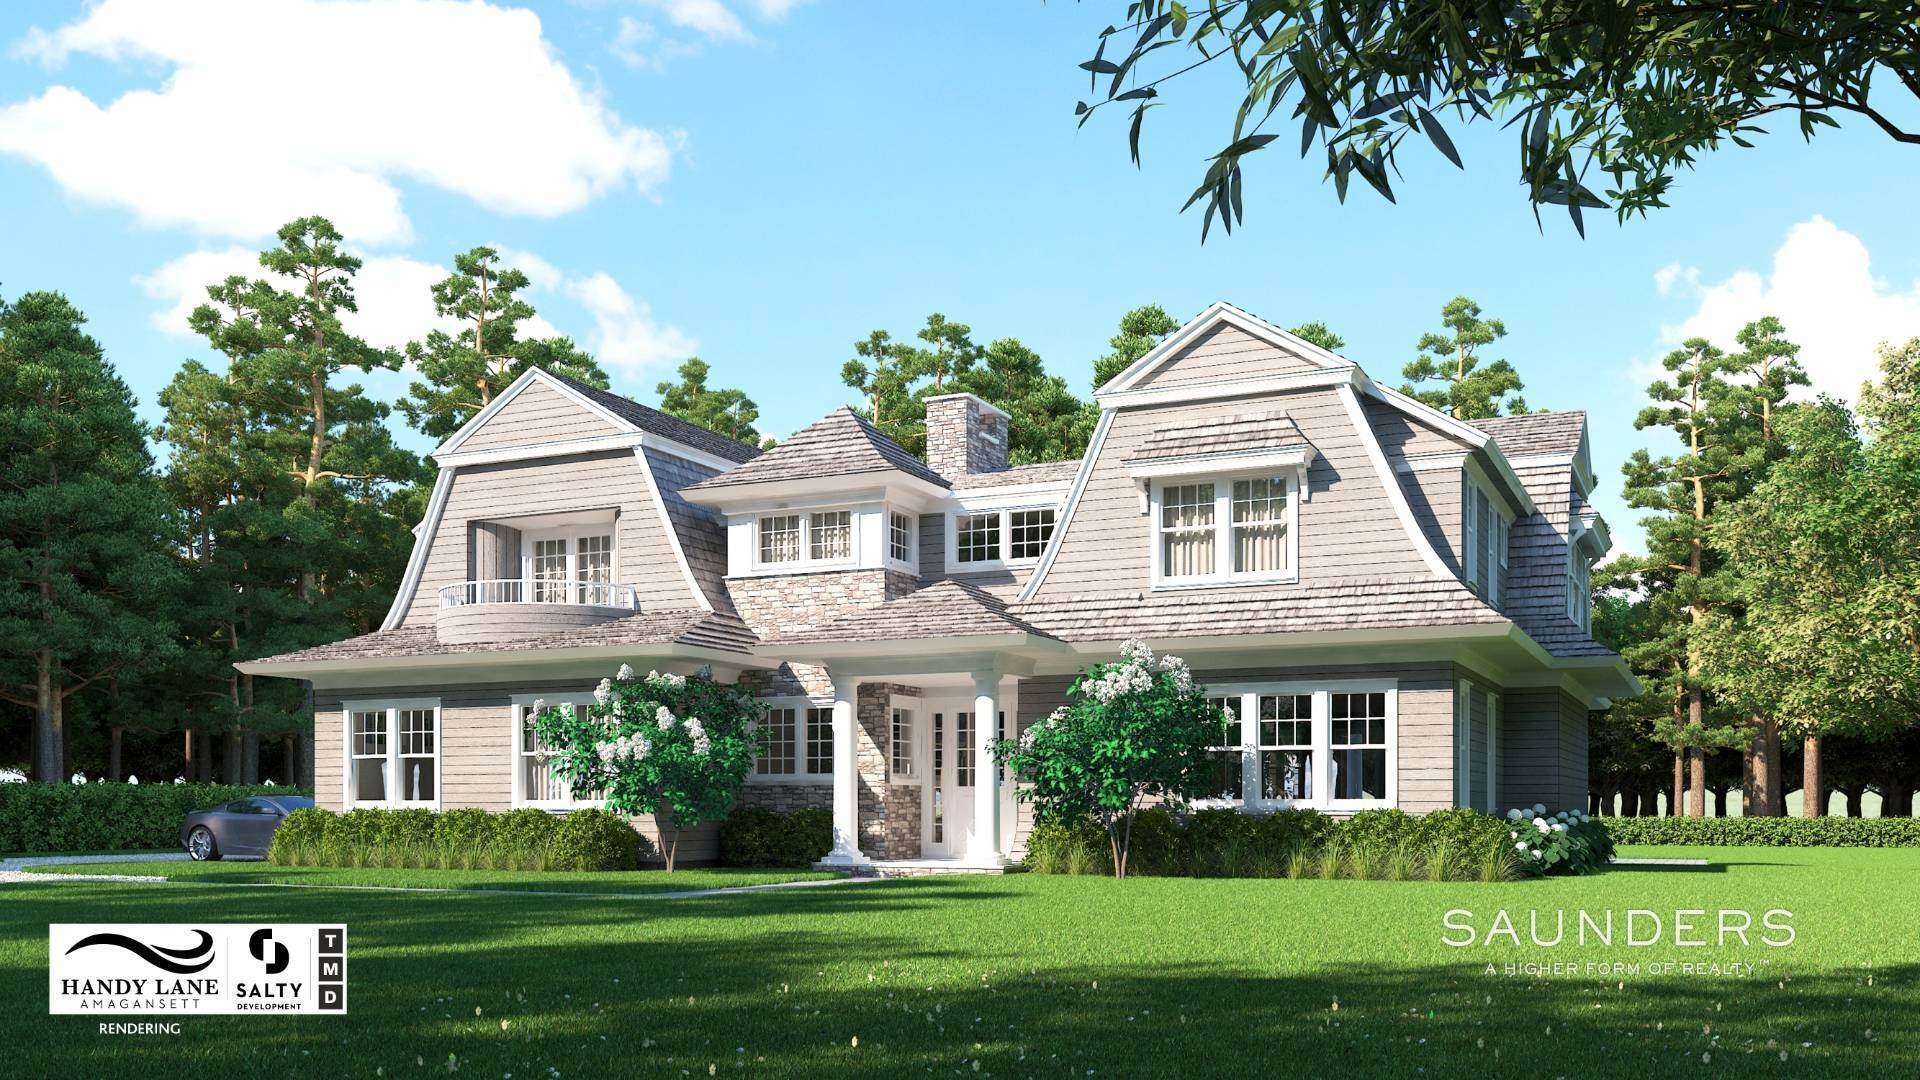 1. Single Family Homes for Sale at Amagansett South Of The Highway-New Construction 35 Handy Lane, Amagansett, NY 11930